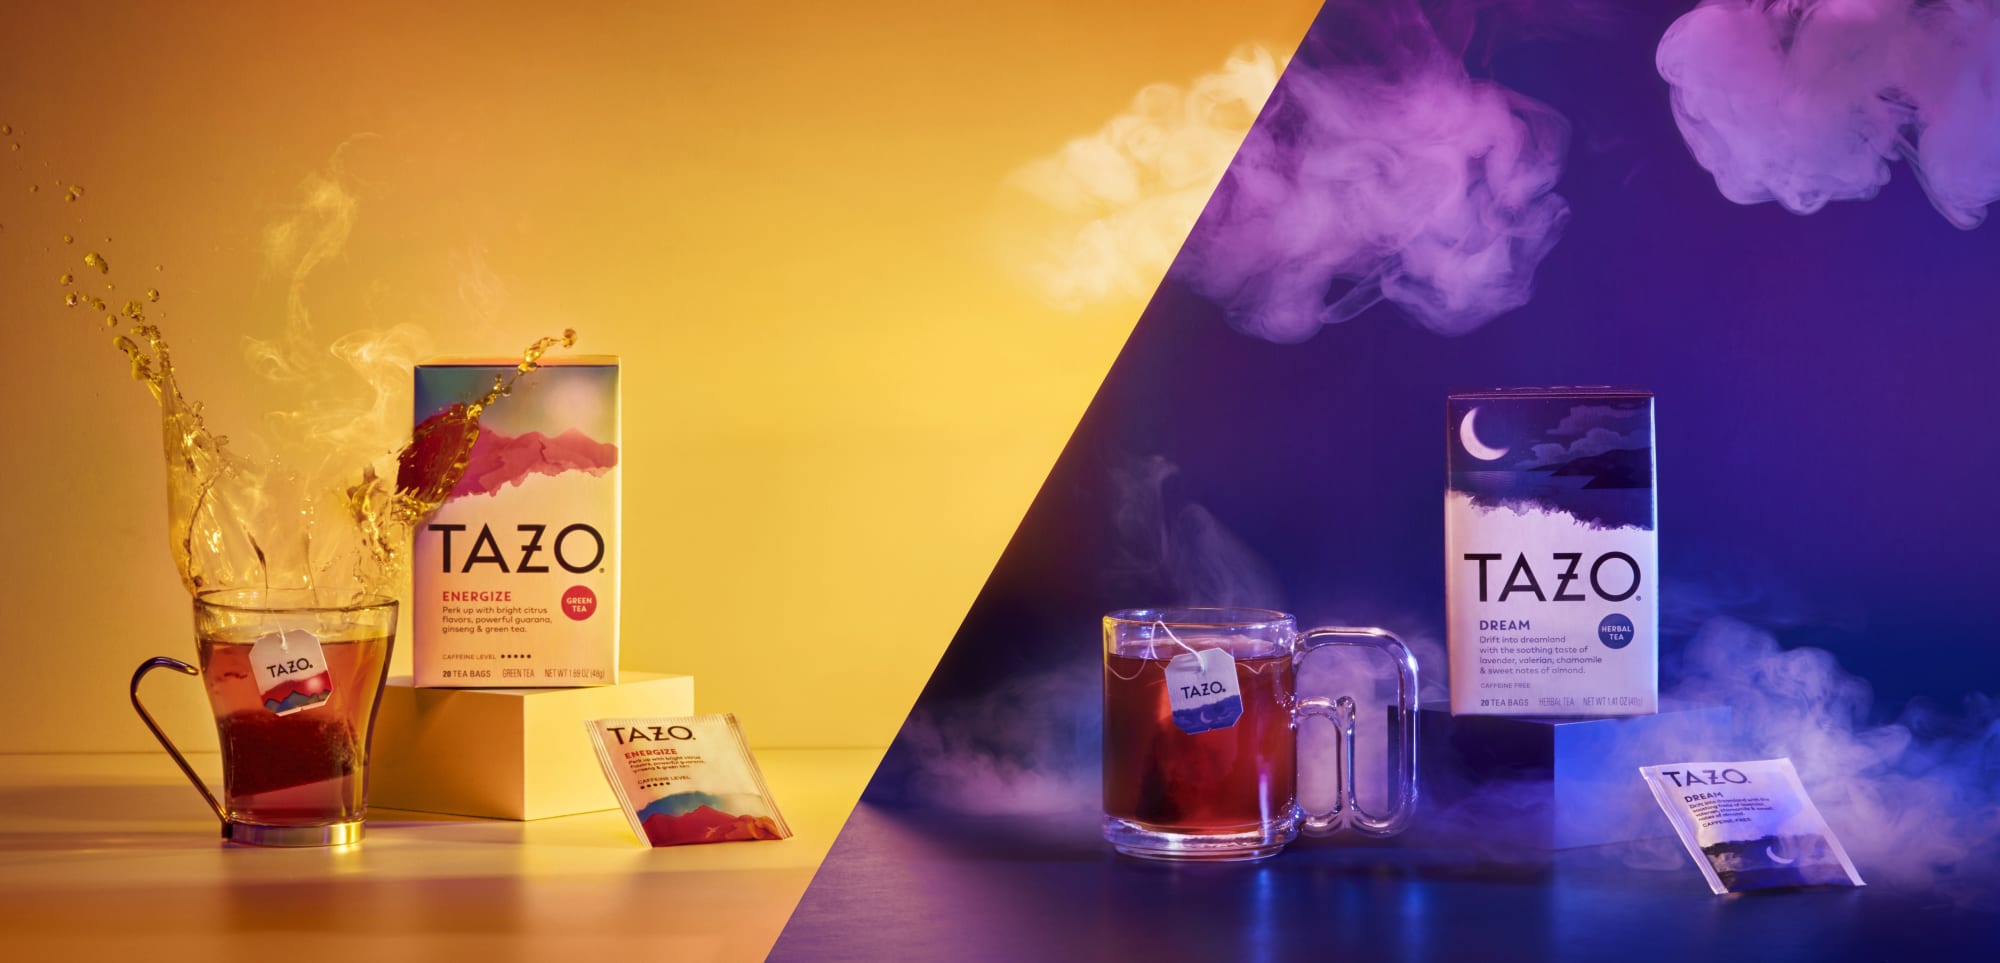 TAZO Tea blends energy management into flavorful sips